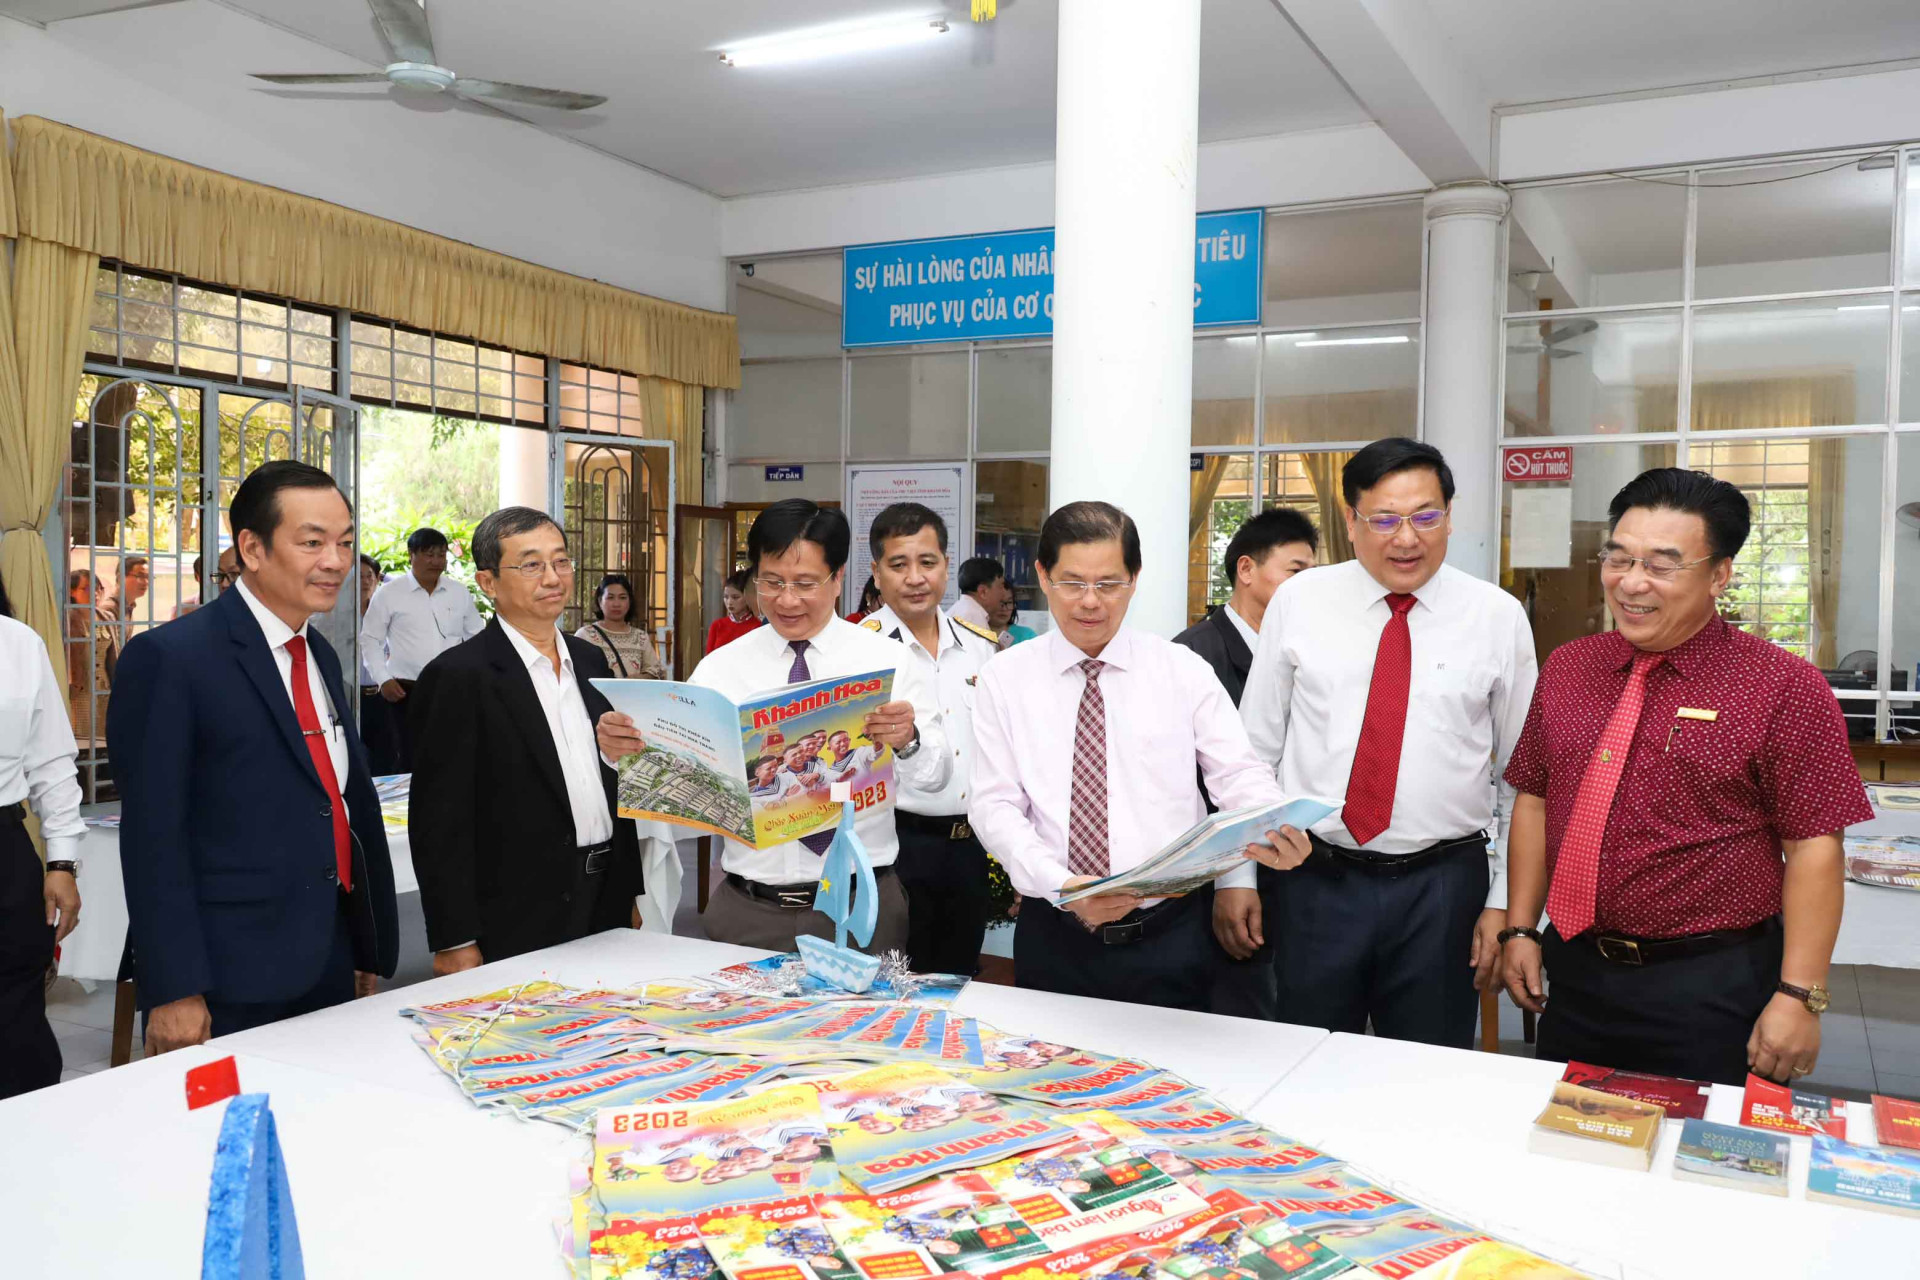 Nguyen Tan Tuan and other representatives reading the displayed publications 